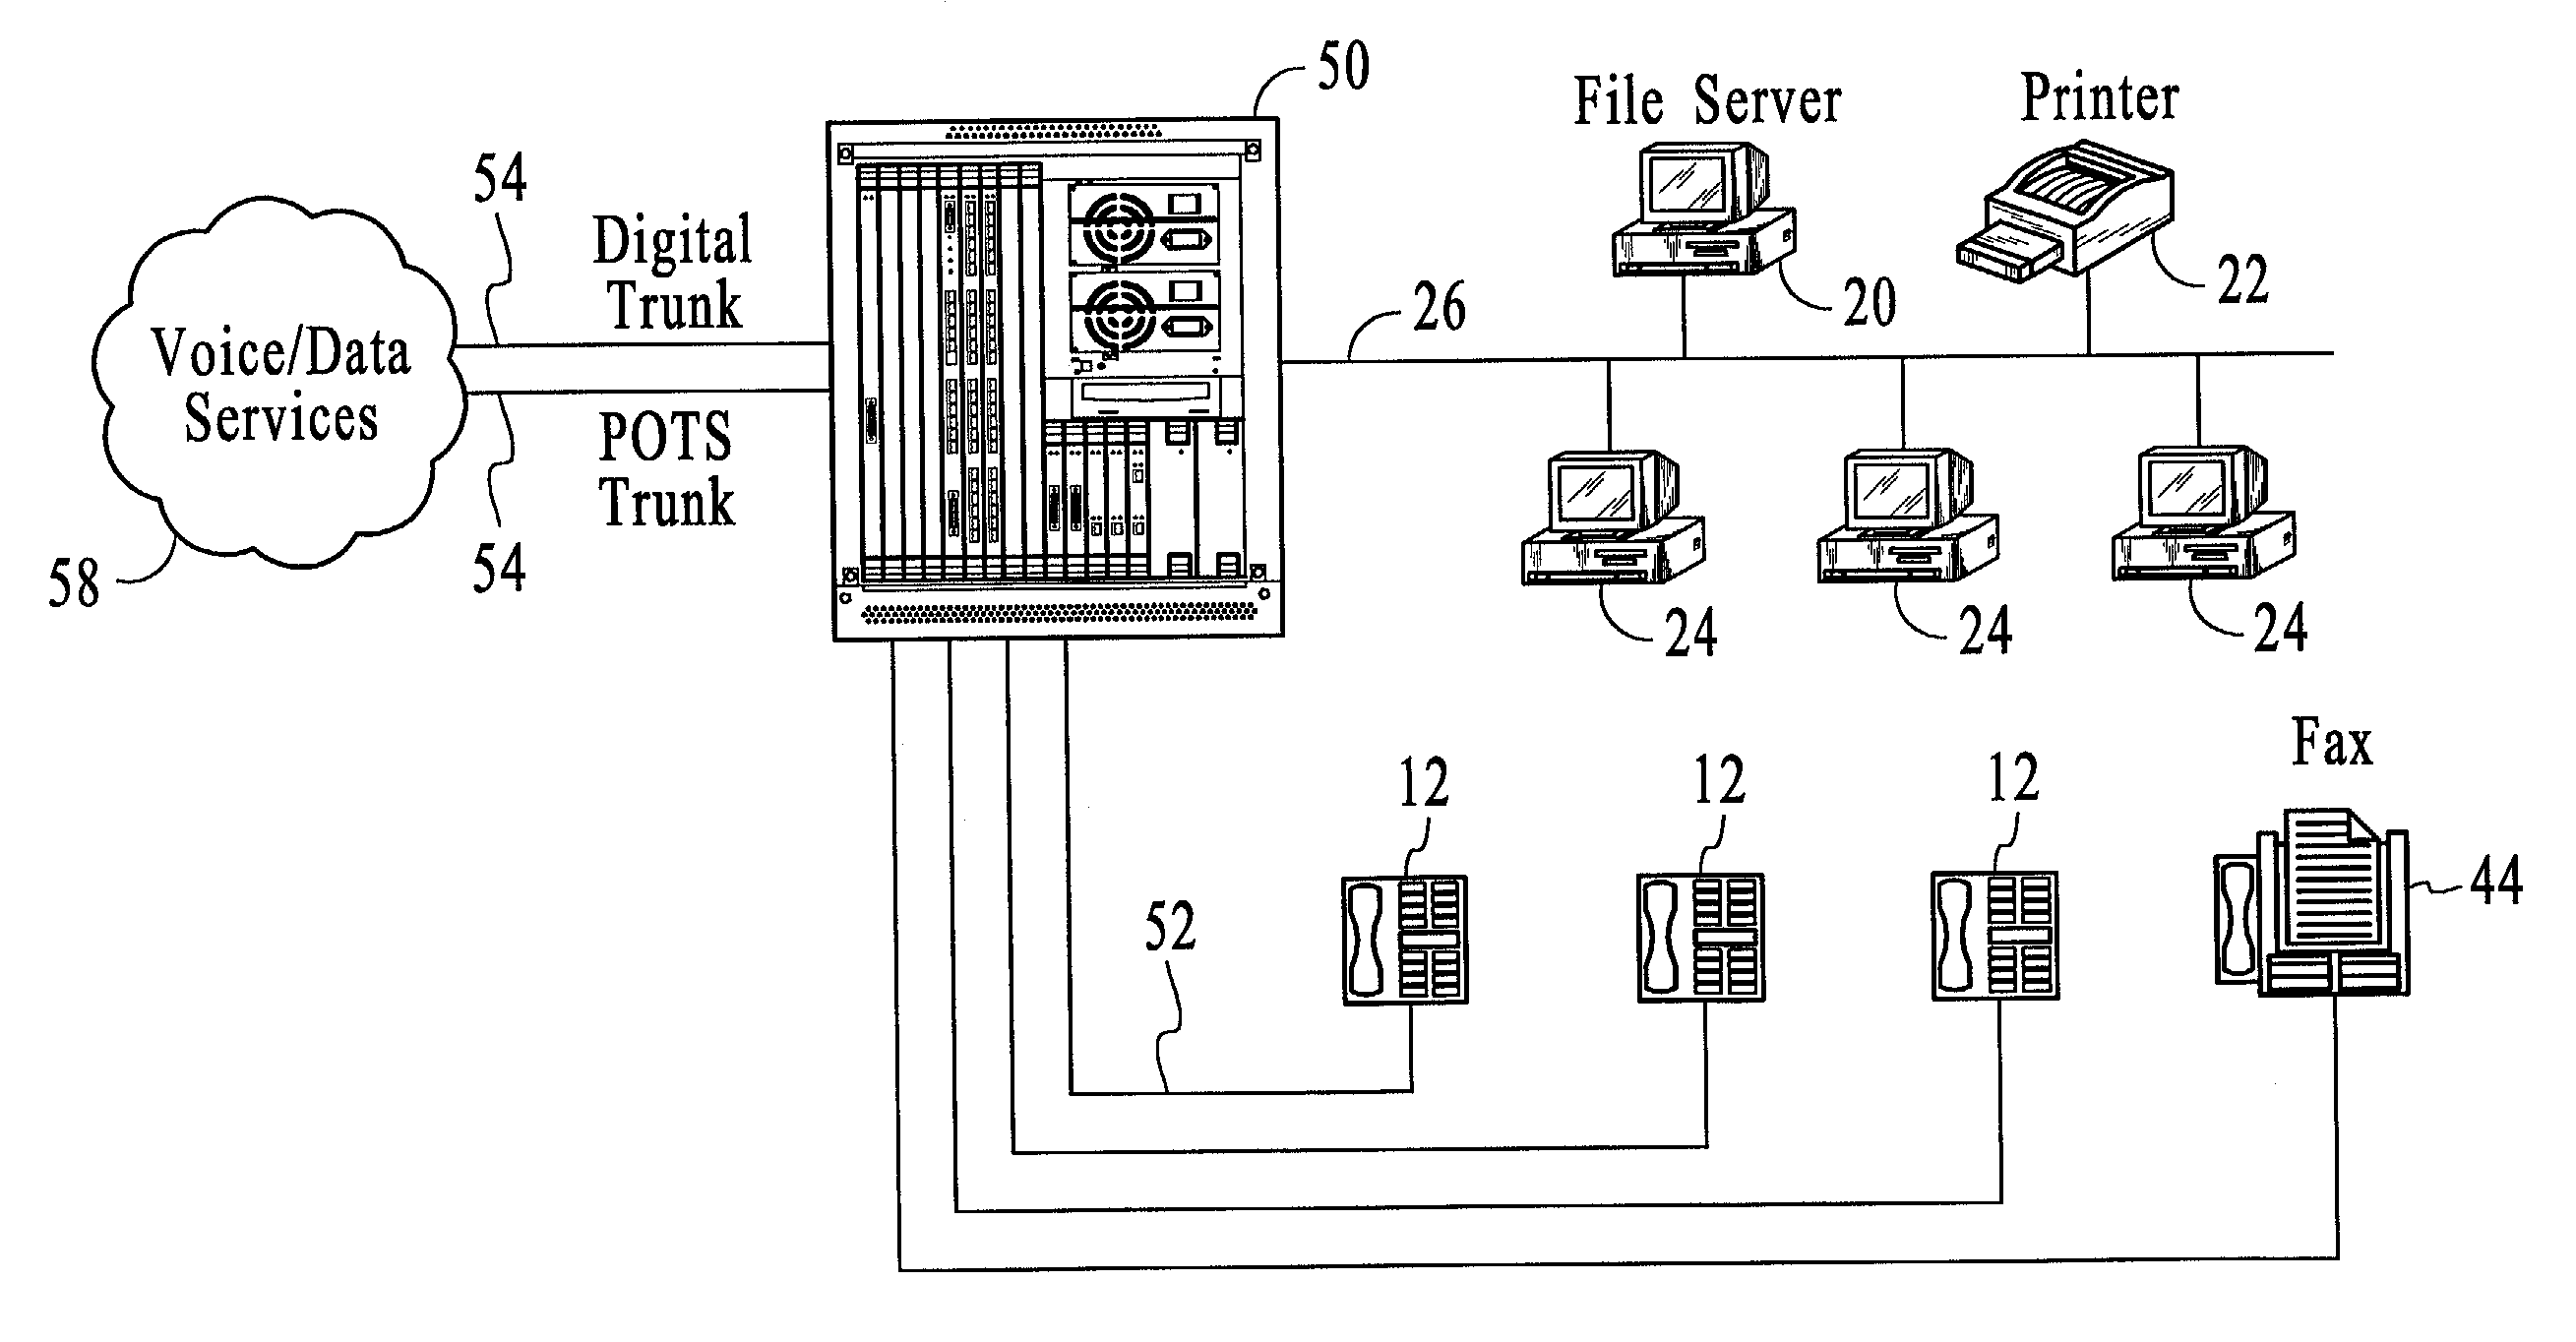 Systems and methods for voice and data communications including hybrid key system/PBX functionality